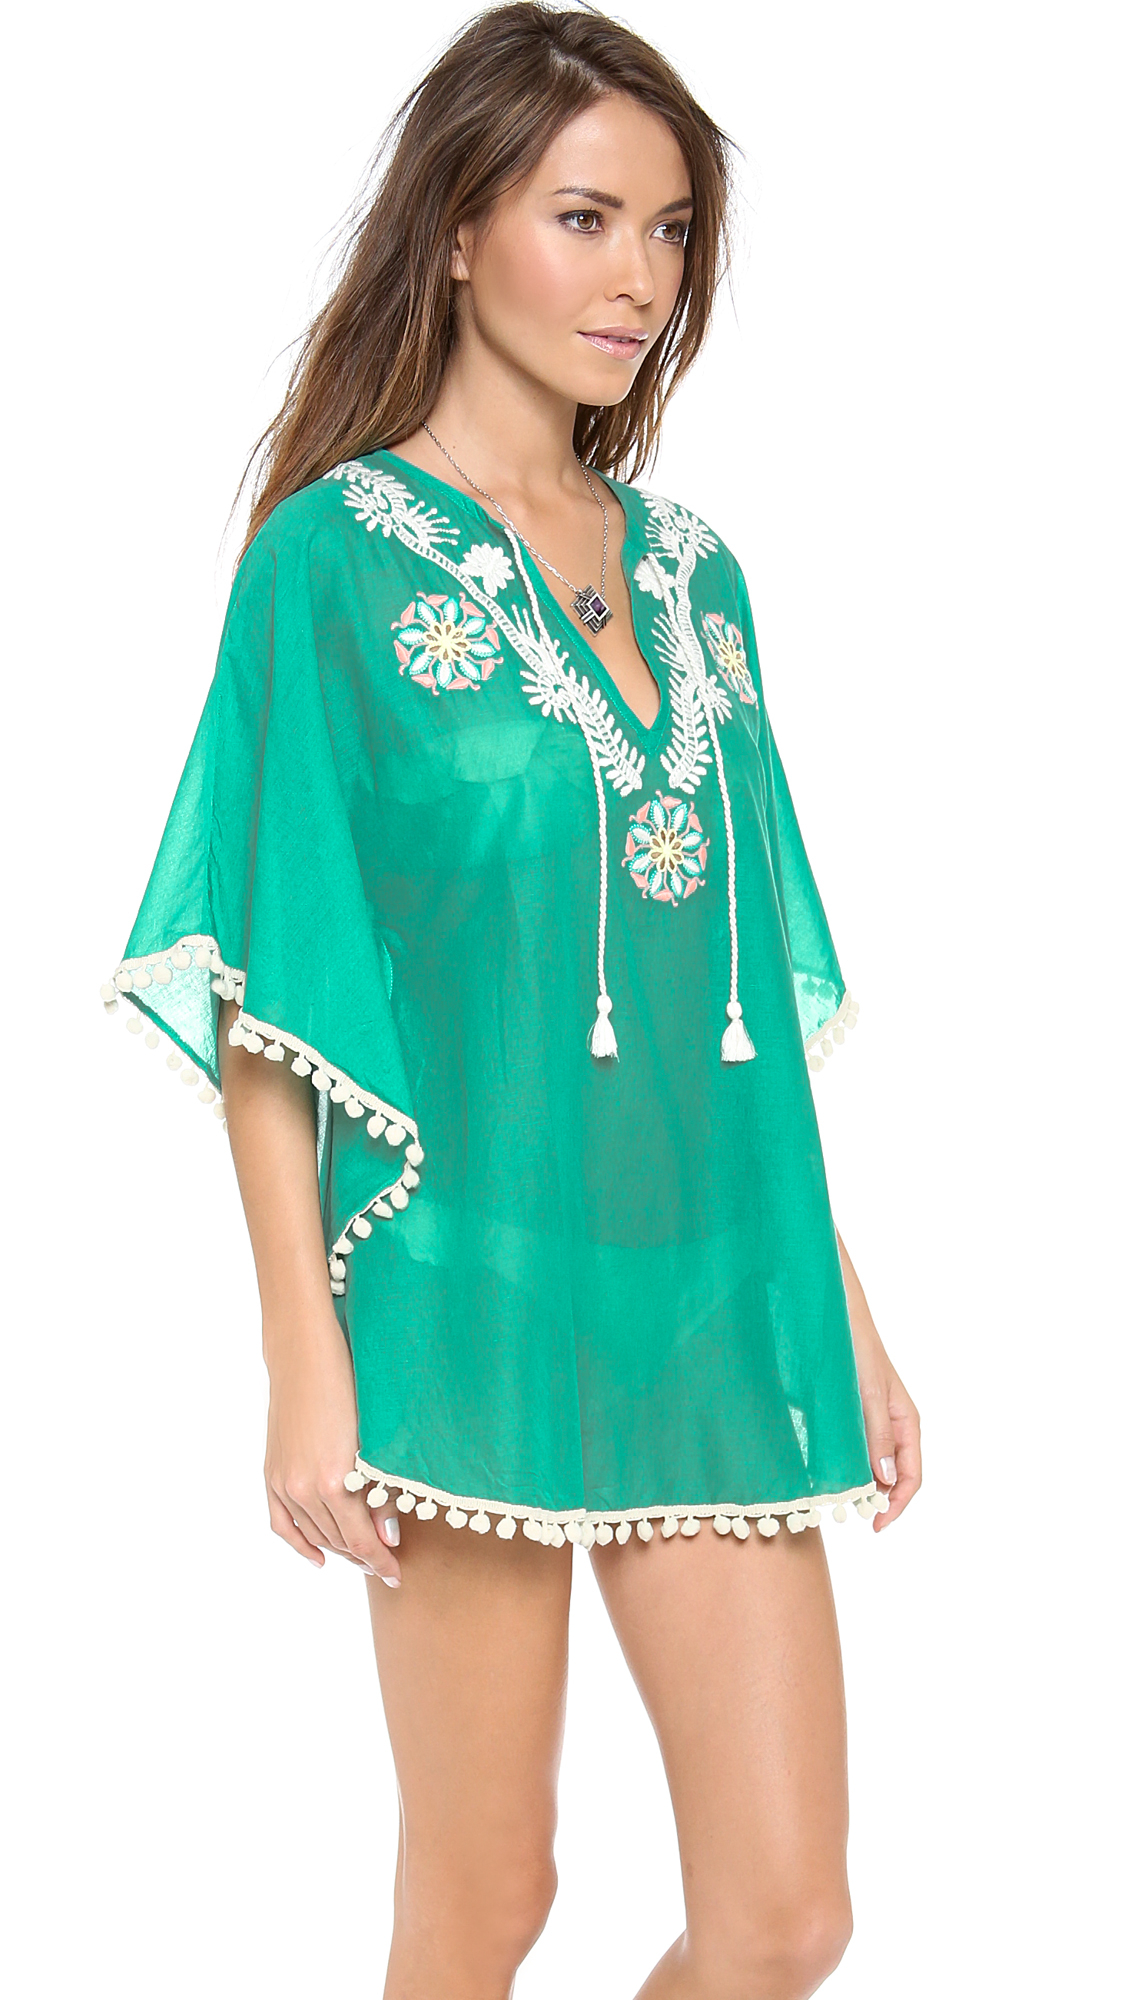 Lyst - Ondademar Illusion Cover Up Dress in Green